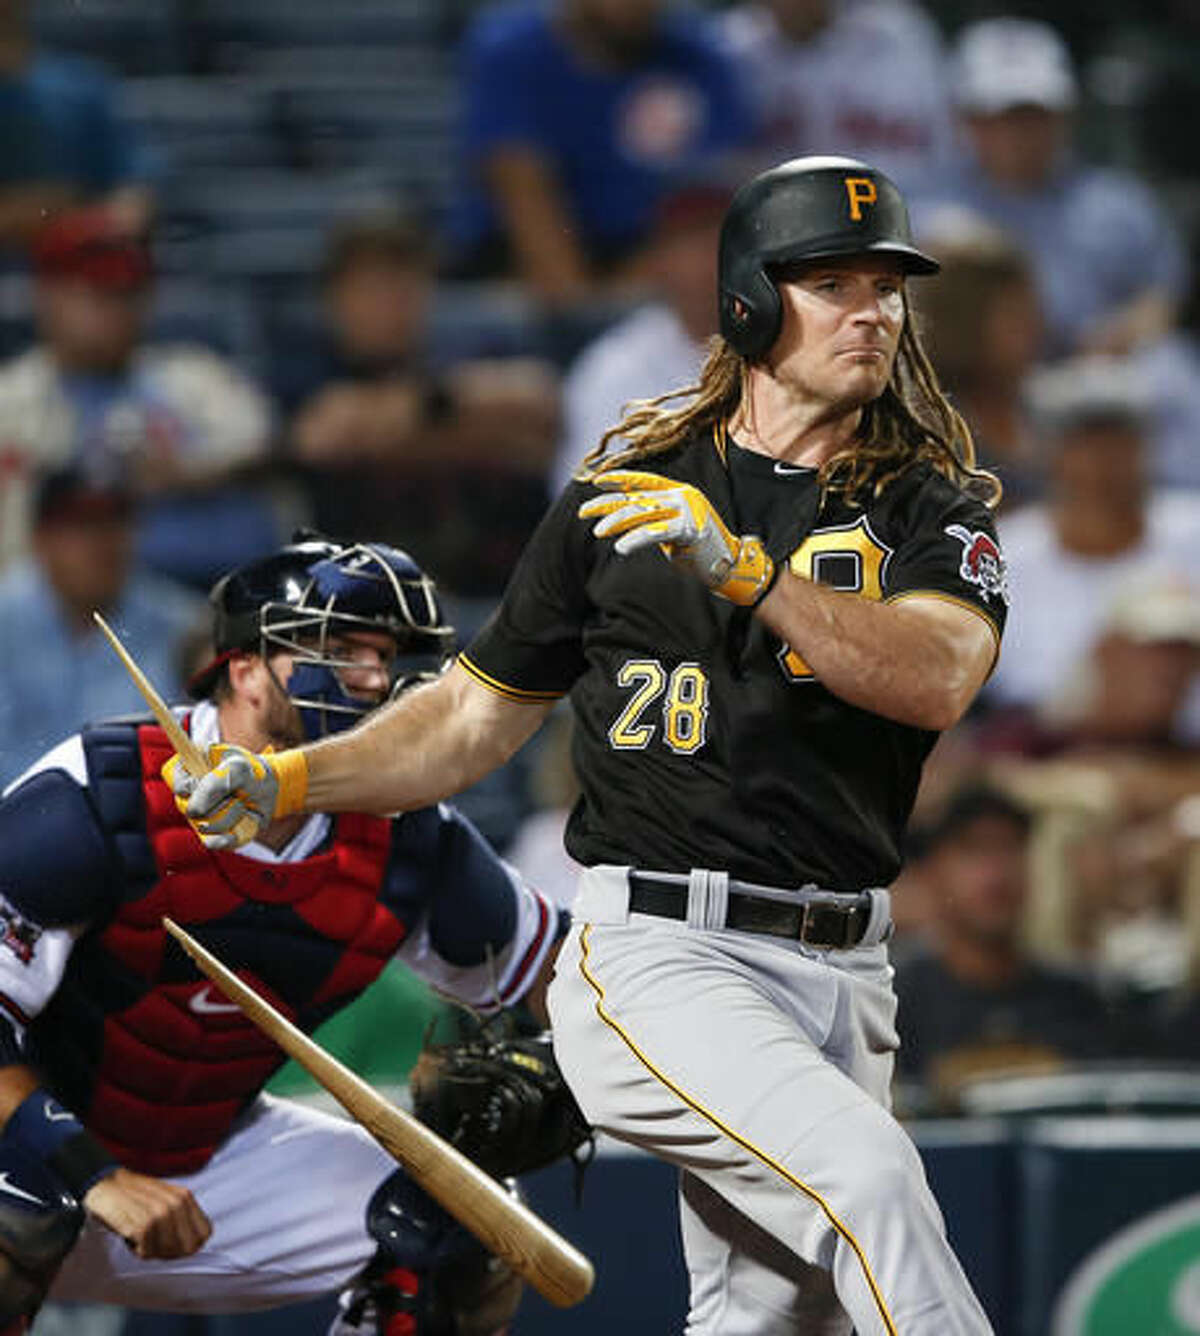 Pittsburgh Pirates pinch-hitter John Jaso (28) breaks his bat as he hits into a double play during the seventh inning of a baseball game against the Atlanta Braves on Thursday, Aug. 4, 2016, in Atlanta. (AP Photo/John Bazemore)